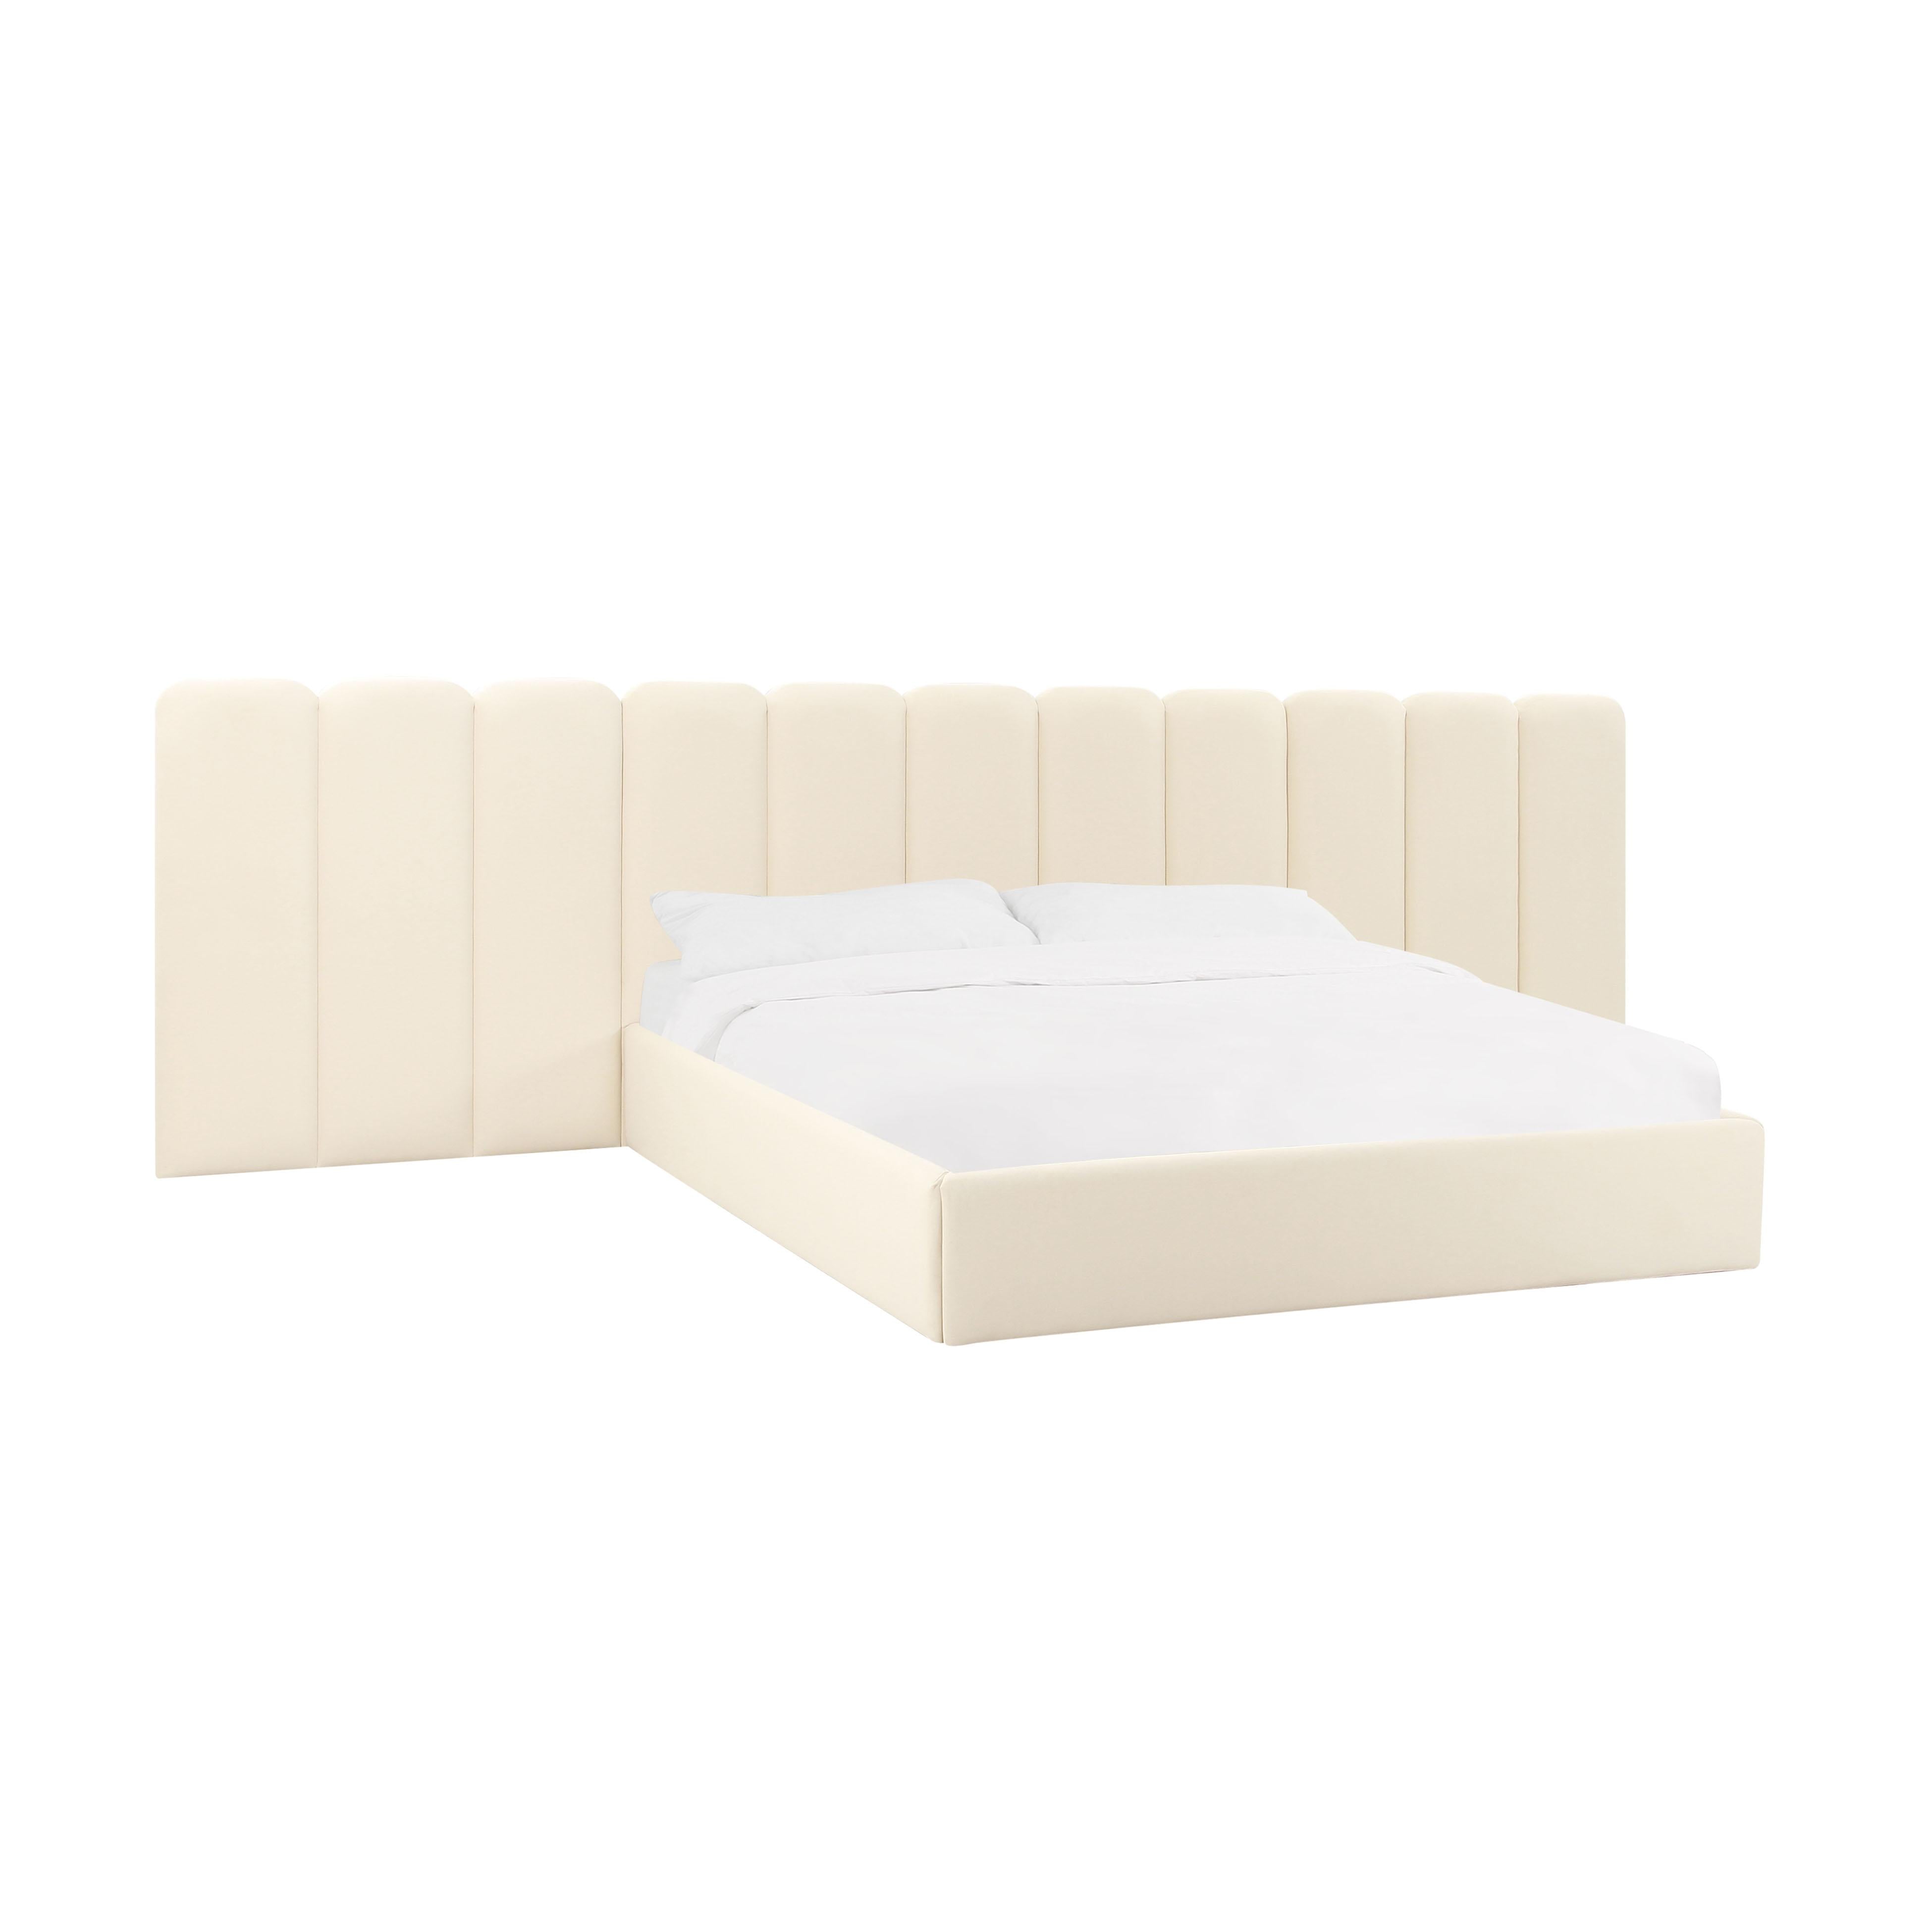 Tov Furniture Beds - Palani Cream Velvet Queen Bed with Wings